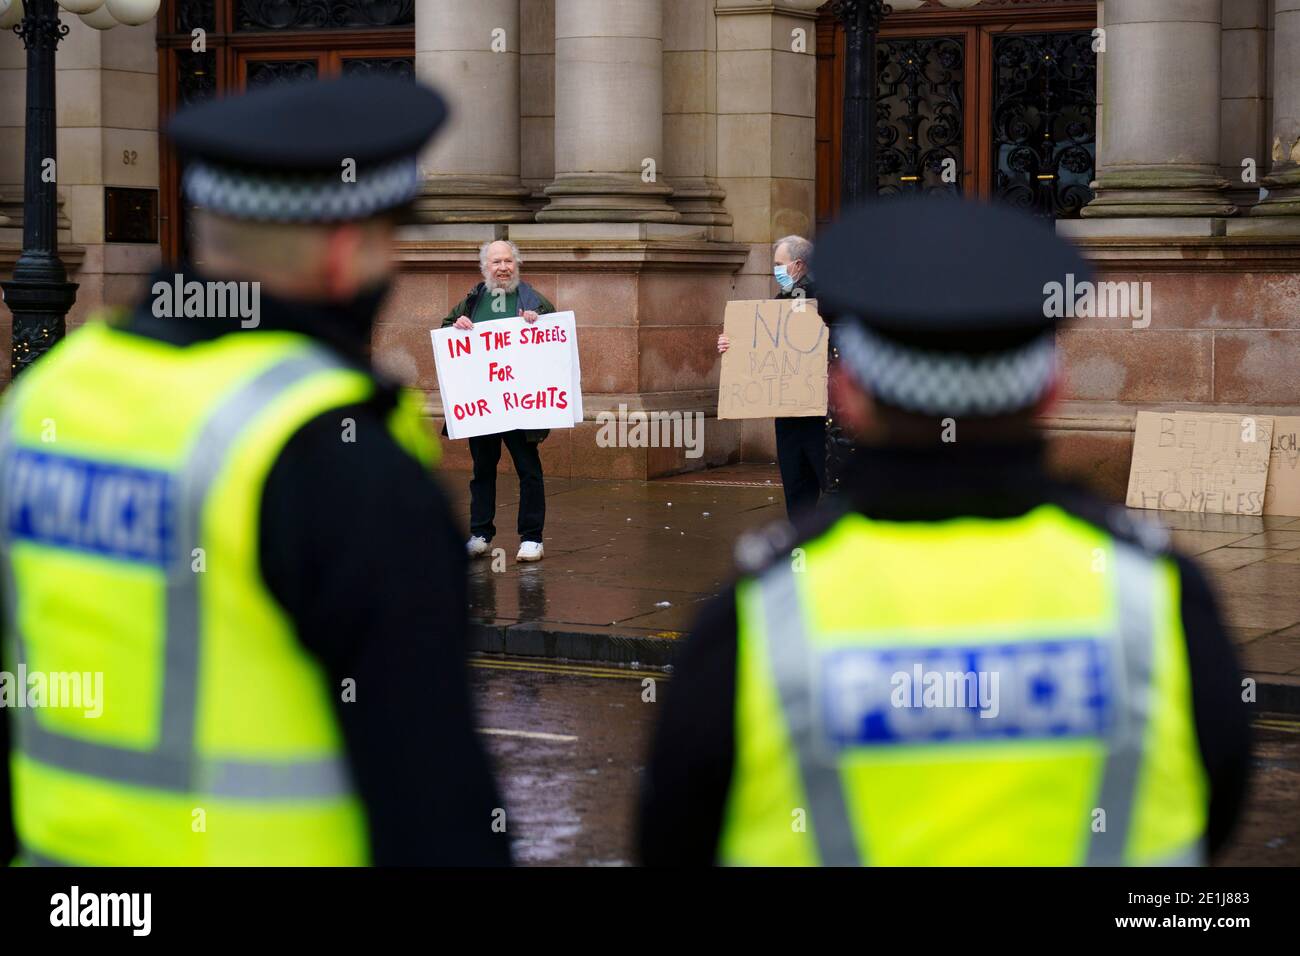 Glasgow, Scotland, UK. 7 January 2021. Anti lockdown protest outside Glasgow City Chambers led by activist Sean Clerkin.  The protesters called on the Scottish Government to remove their ban on the freedom to protest and demonstrate which is contrary to articles 10 and 11 of the European Convention of Human Rights which emphasises freedom of expression and the right to demonstrate and protest.    Iain Masterton/Alamy Live News Stock Photo